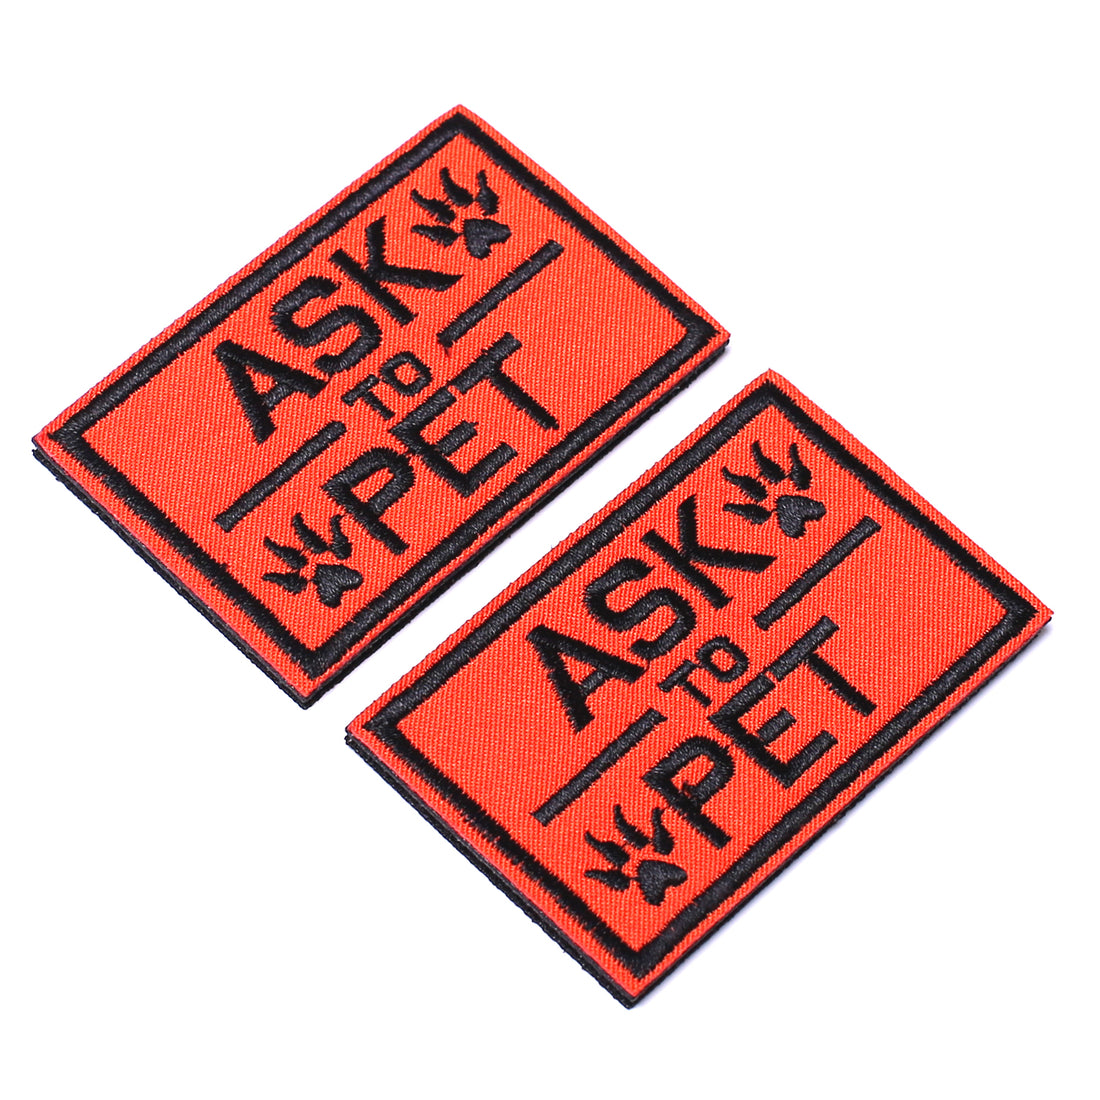 2 Pack Ask to Pet Dog Patches, Tags for Hook and Loop Patches Vests and Harnesses for Dogs, Orange